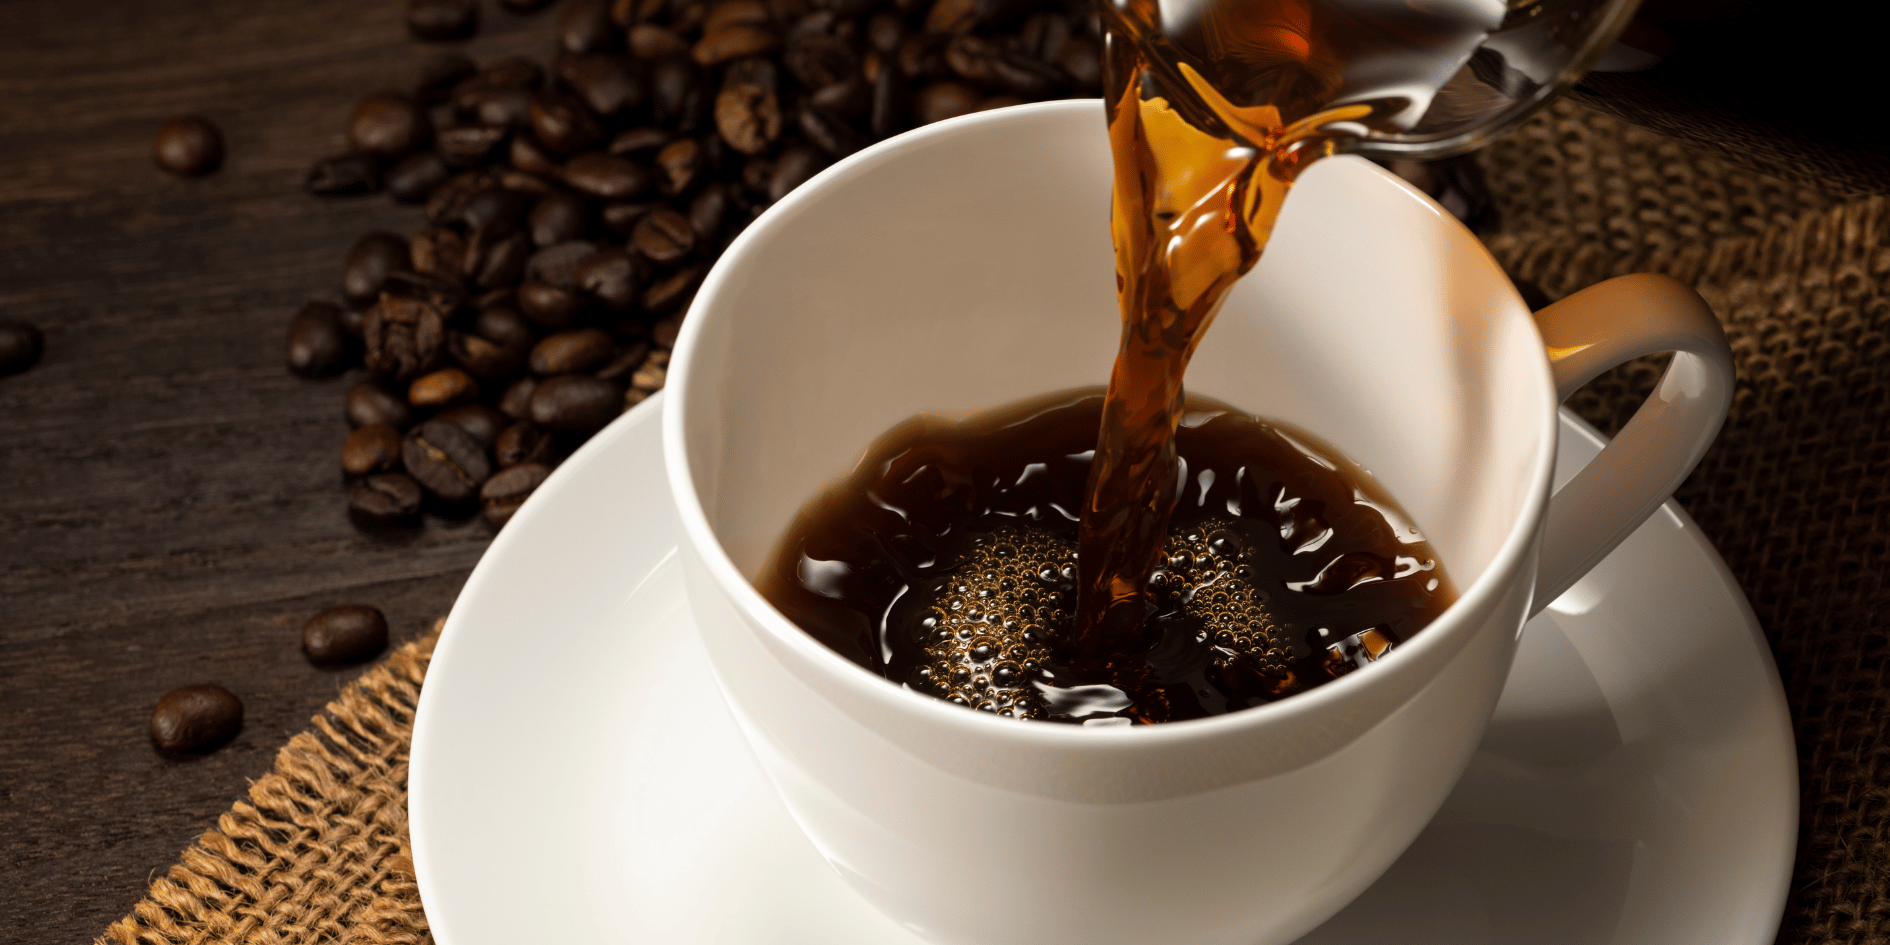 Best Filter Coffee to fit your drip coffee maker